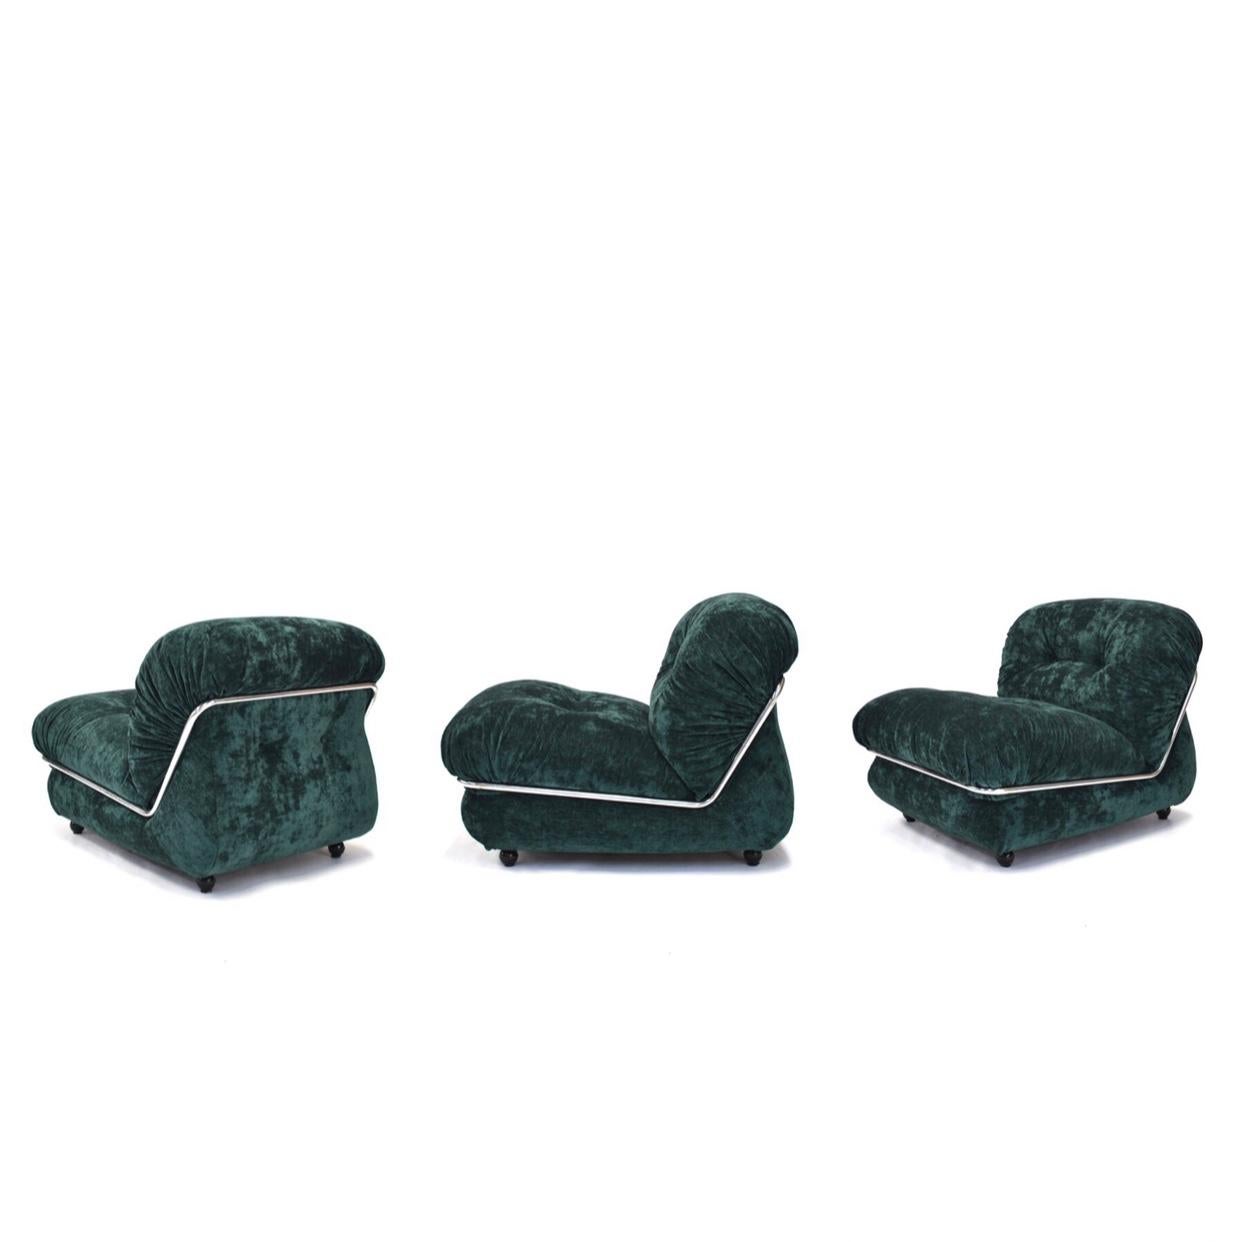 Three piece sectional sofa in style of the Soriana sofa by Afra and Tobia Scarpa. The sections can also be used separate as lounge chairs. It has been reupholstered with a trendy Emerald green velvet fabric.

Designer: Unknown

Manufacturer: